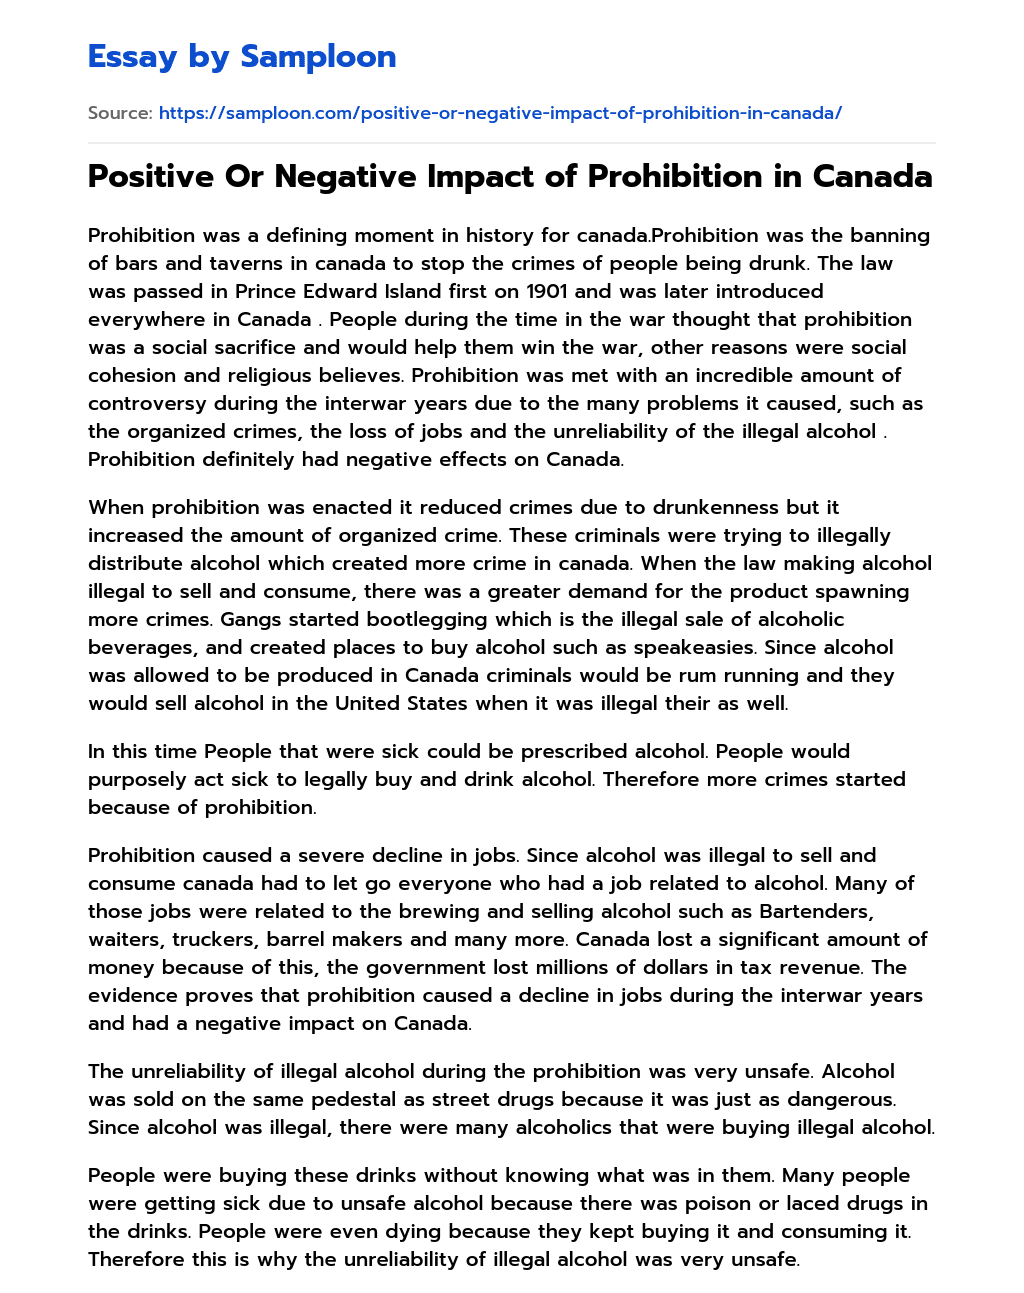 Positive Or Negative Impact of Prohibition in Canada essay